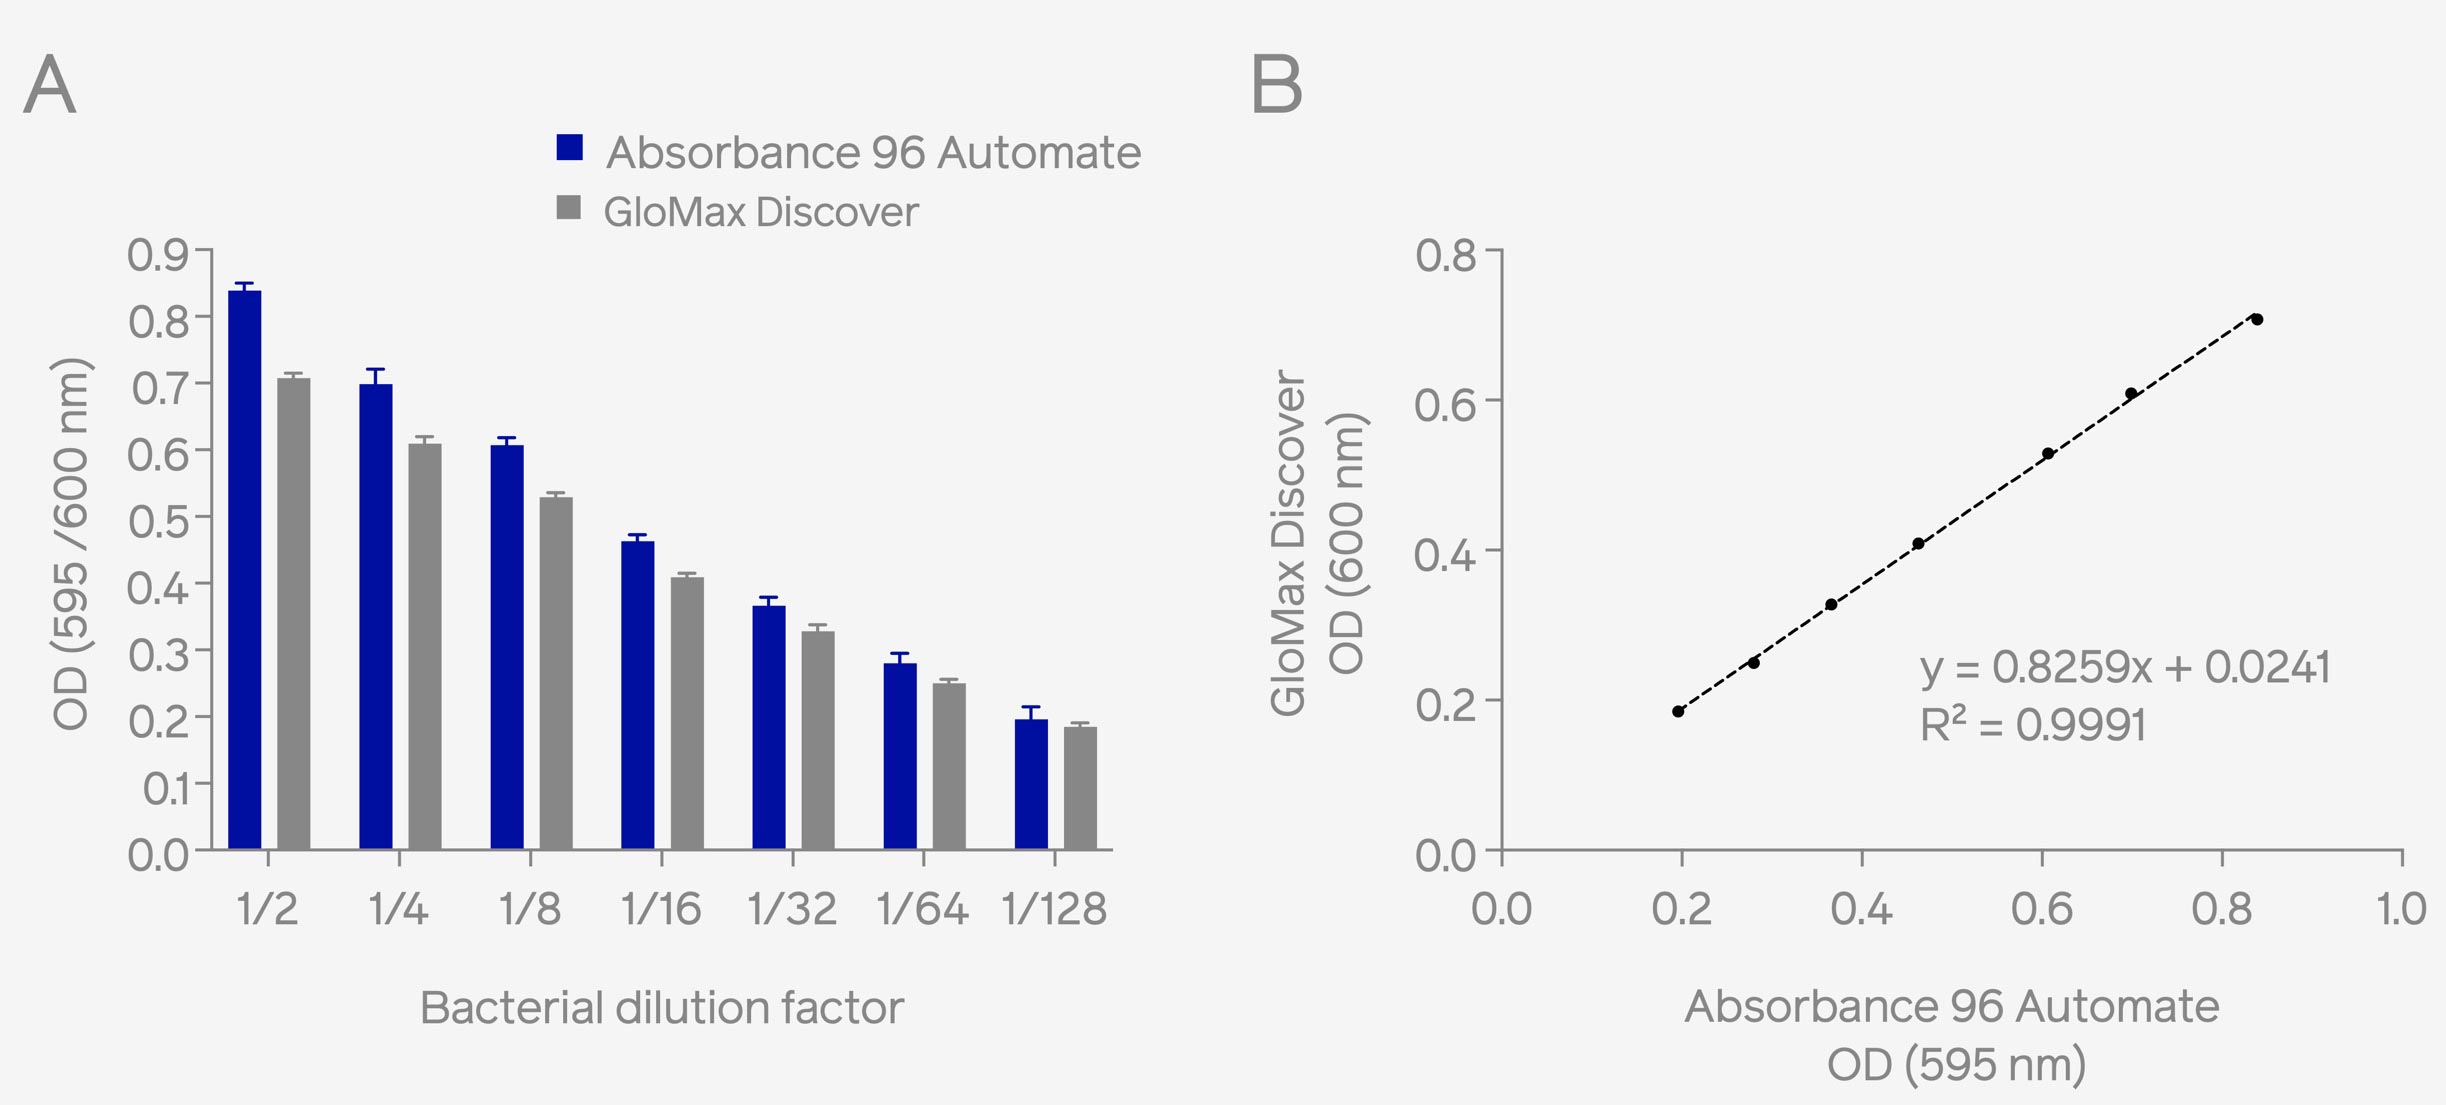 Fig. 1: Different bacterial samples were prepared, and absorbance was measured either at 595 nm using Absorbance 96 Automate or at 600 nm with GloMax® Discover (A). A high readout correlation was observed between both devices (B), suggesting identical reproducibility, sensitivity, and linearity across the dynamic range. Accelerate Bacterial Growth Measurement with Integrated Absorbance 96 Automate – Eppendorf® epMotion® Automated Workflow Byonoy